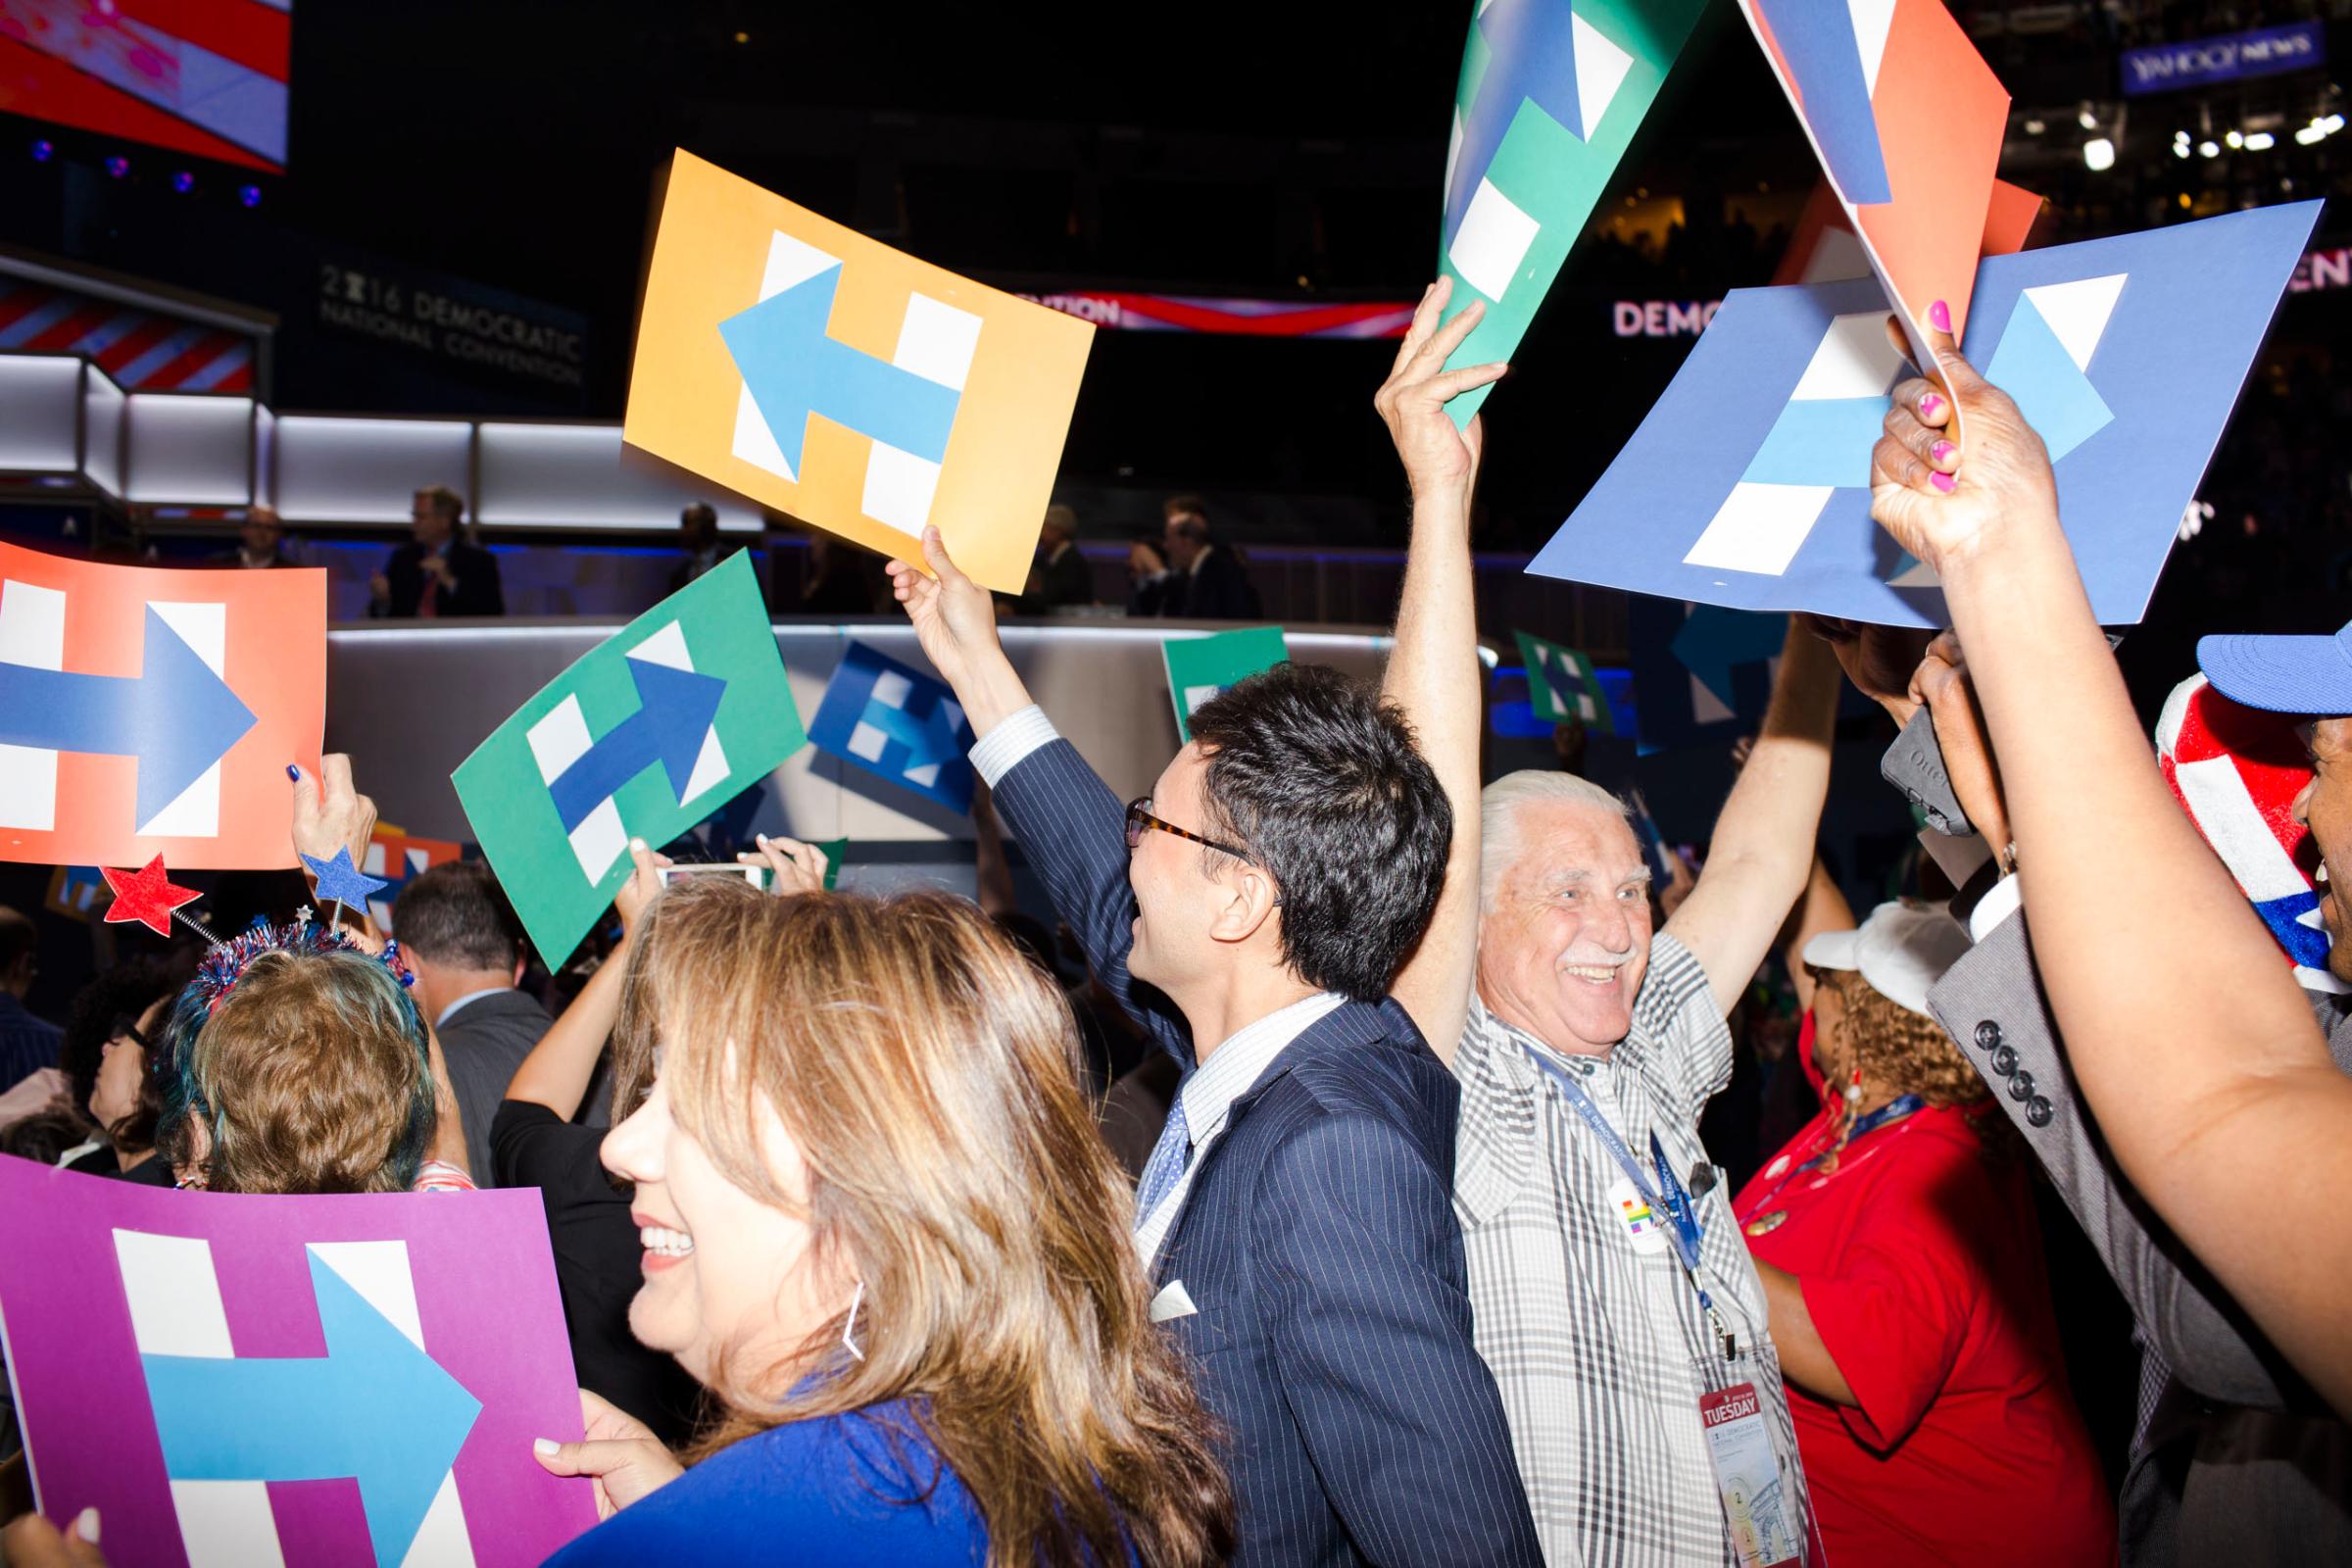 Reaction to Bernie endorsing Hillary at the 2016 Democratic National Convention in Philadelphia on Tuesday, July 26, 2016.